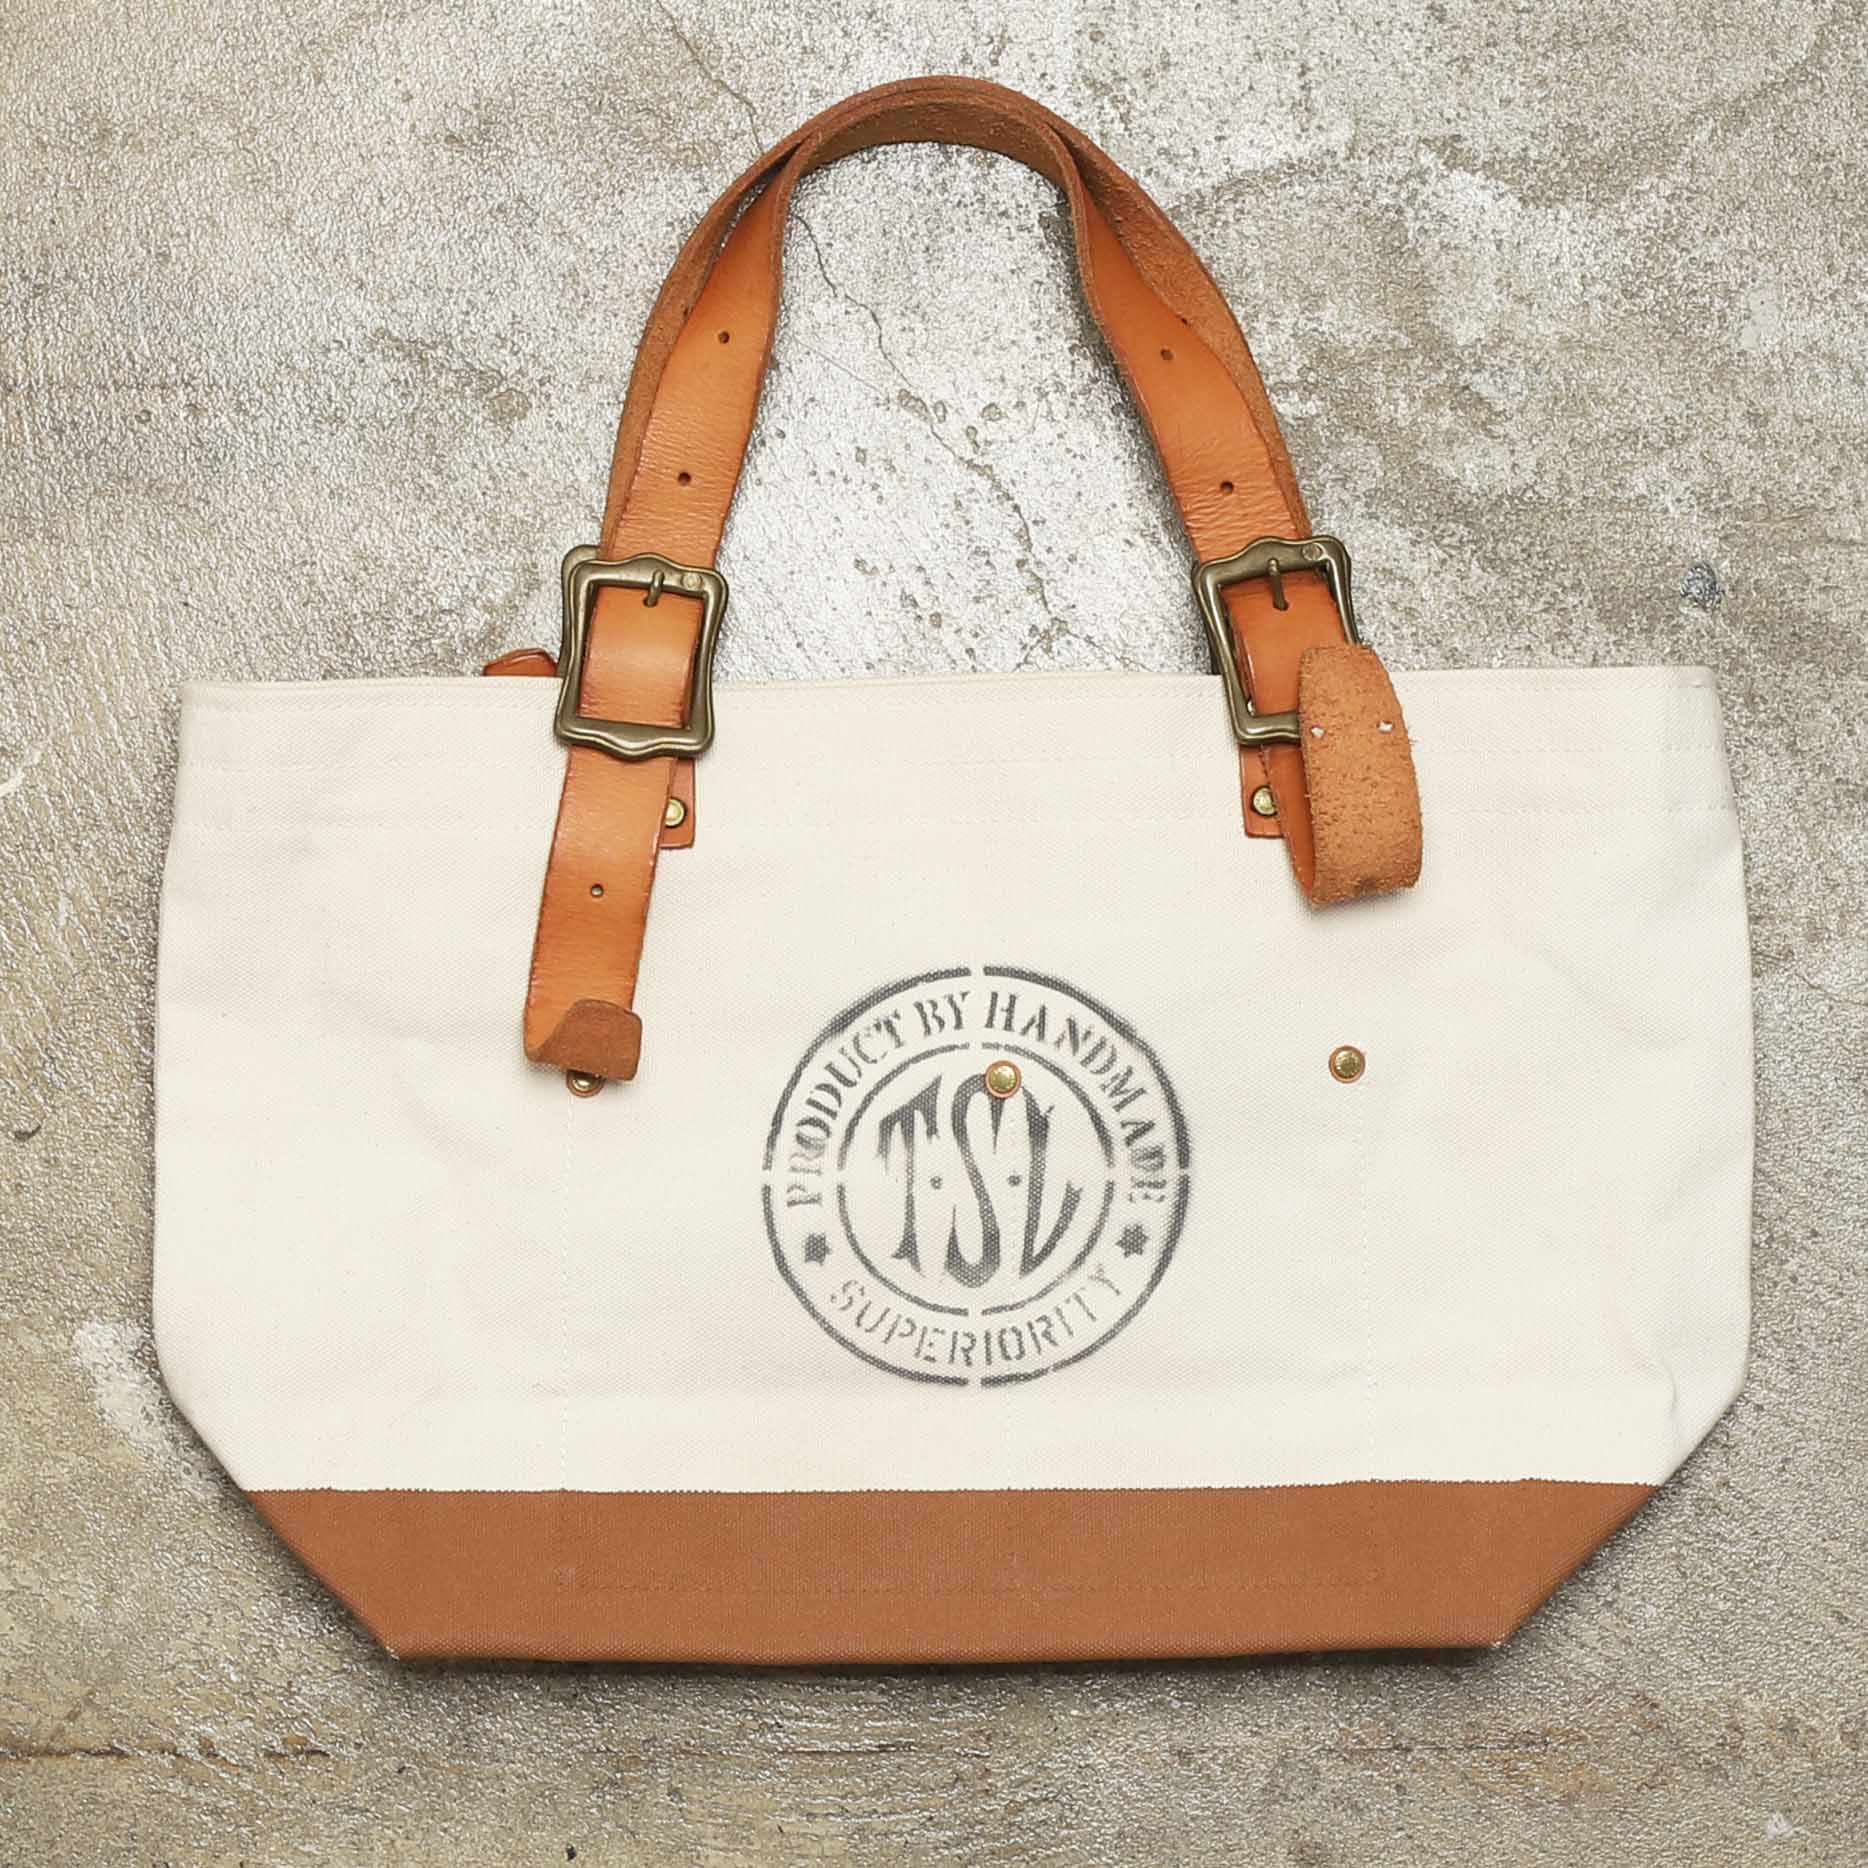 THE SUPERIOR LABOR LEATHER CANVAS TOTE BAG - NATURAL